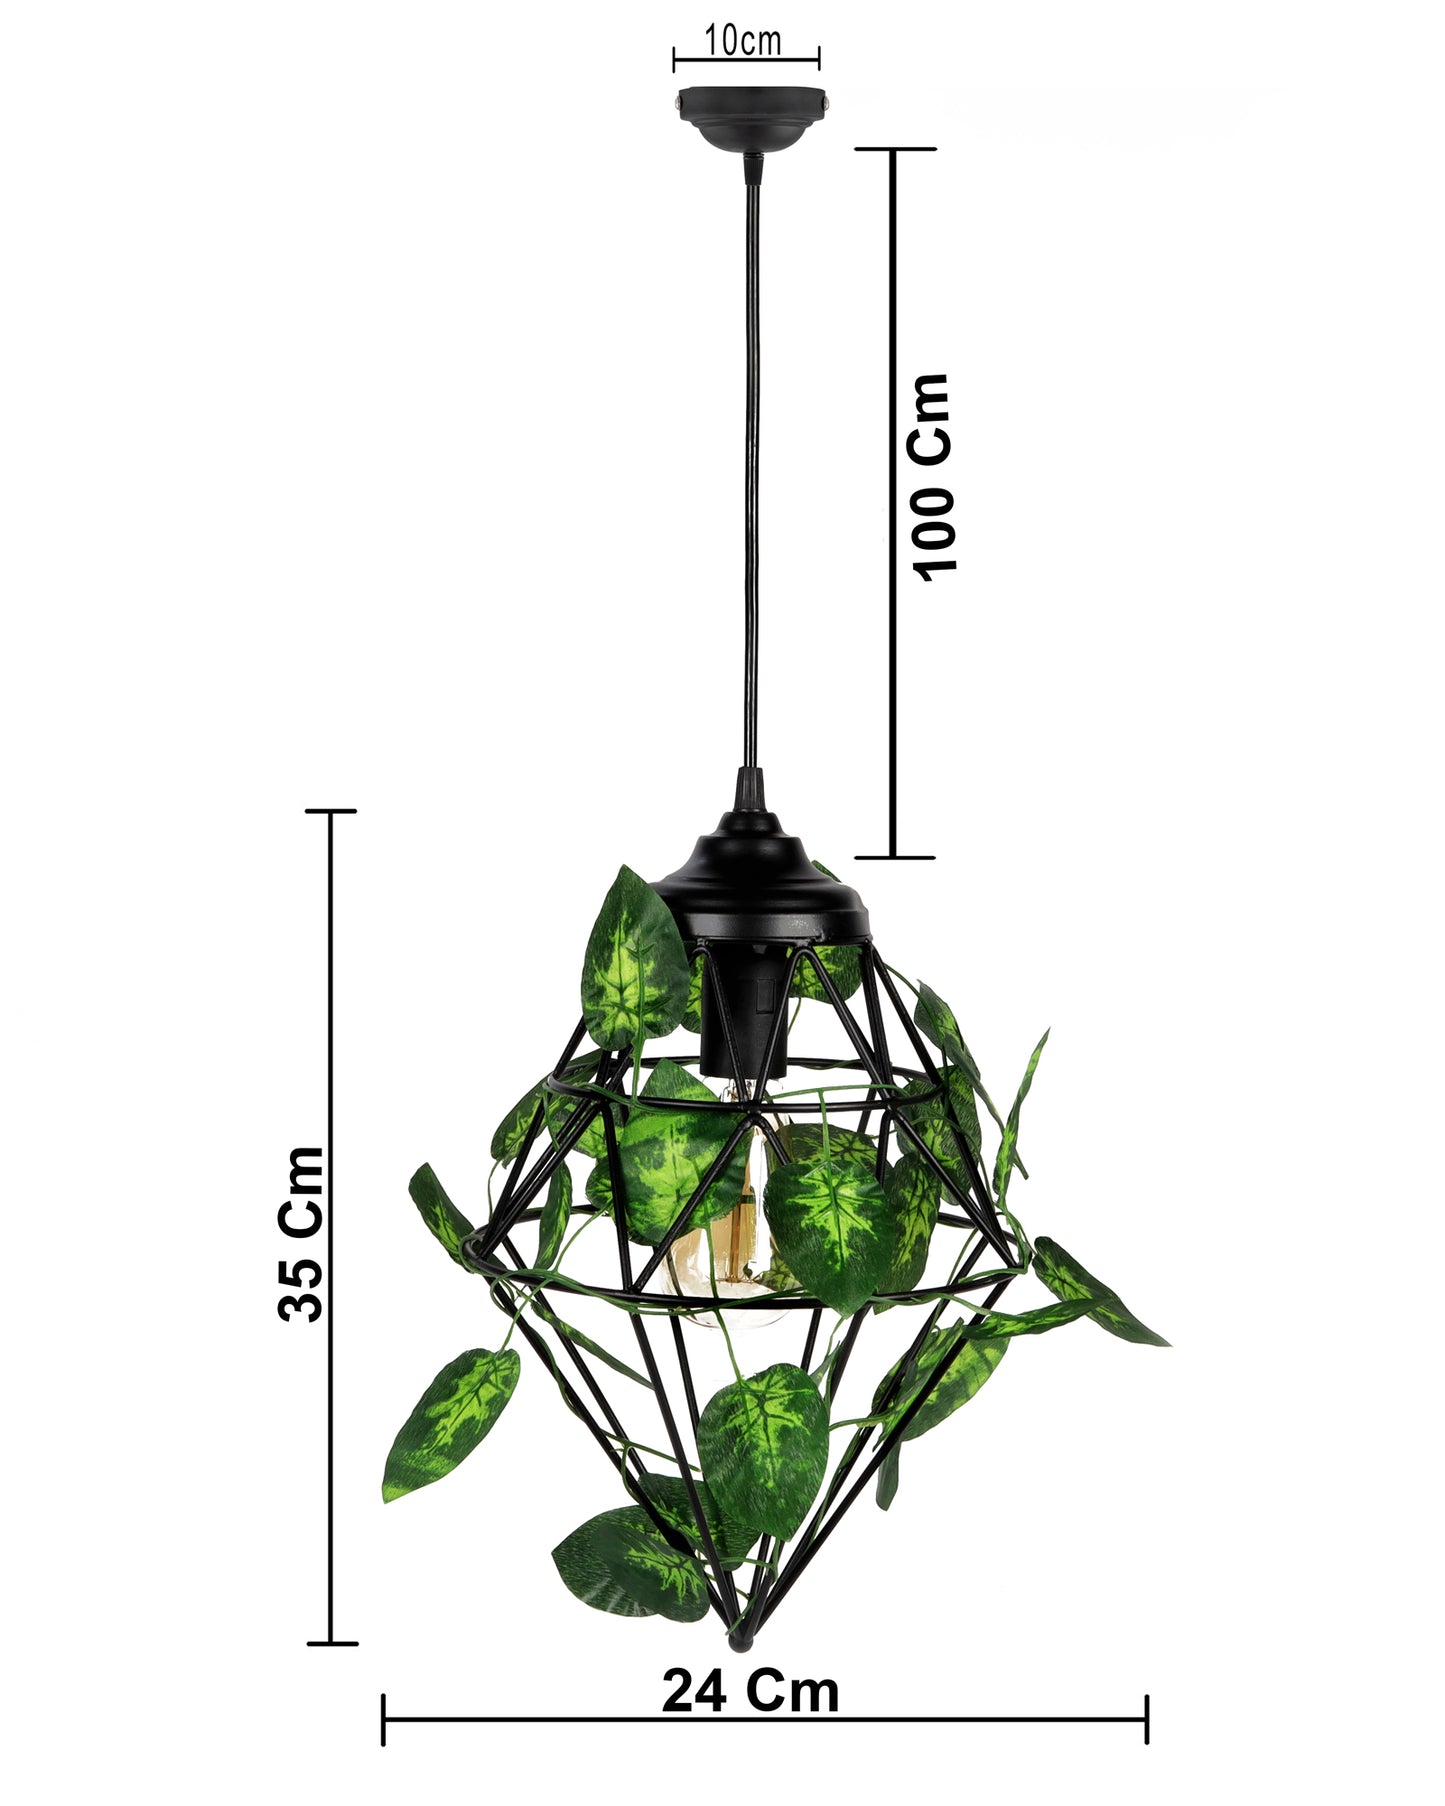 Hanging Pendant Plant Light Fixtures Creative Home Decor Living Room Dining, Ceiling light with leafy vine and filament bulb, Full Diamond